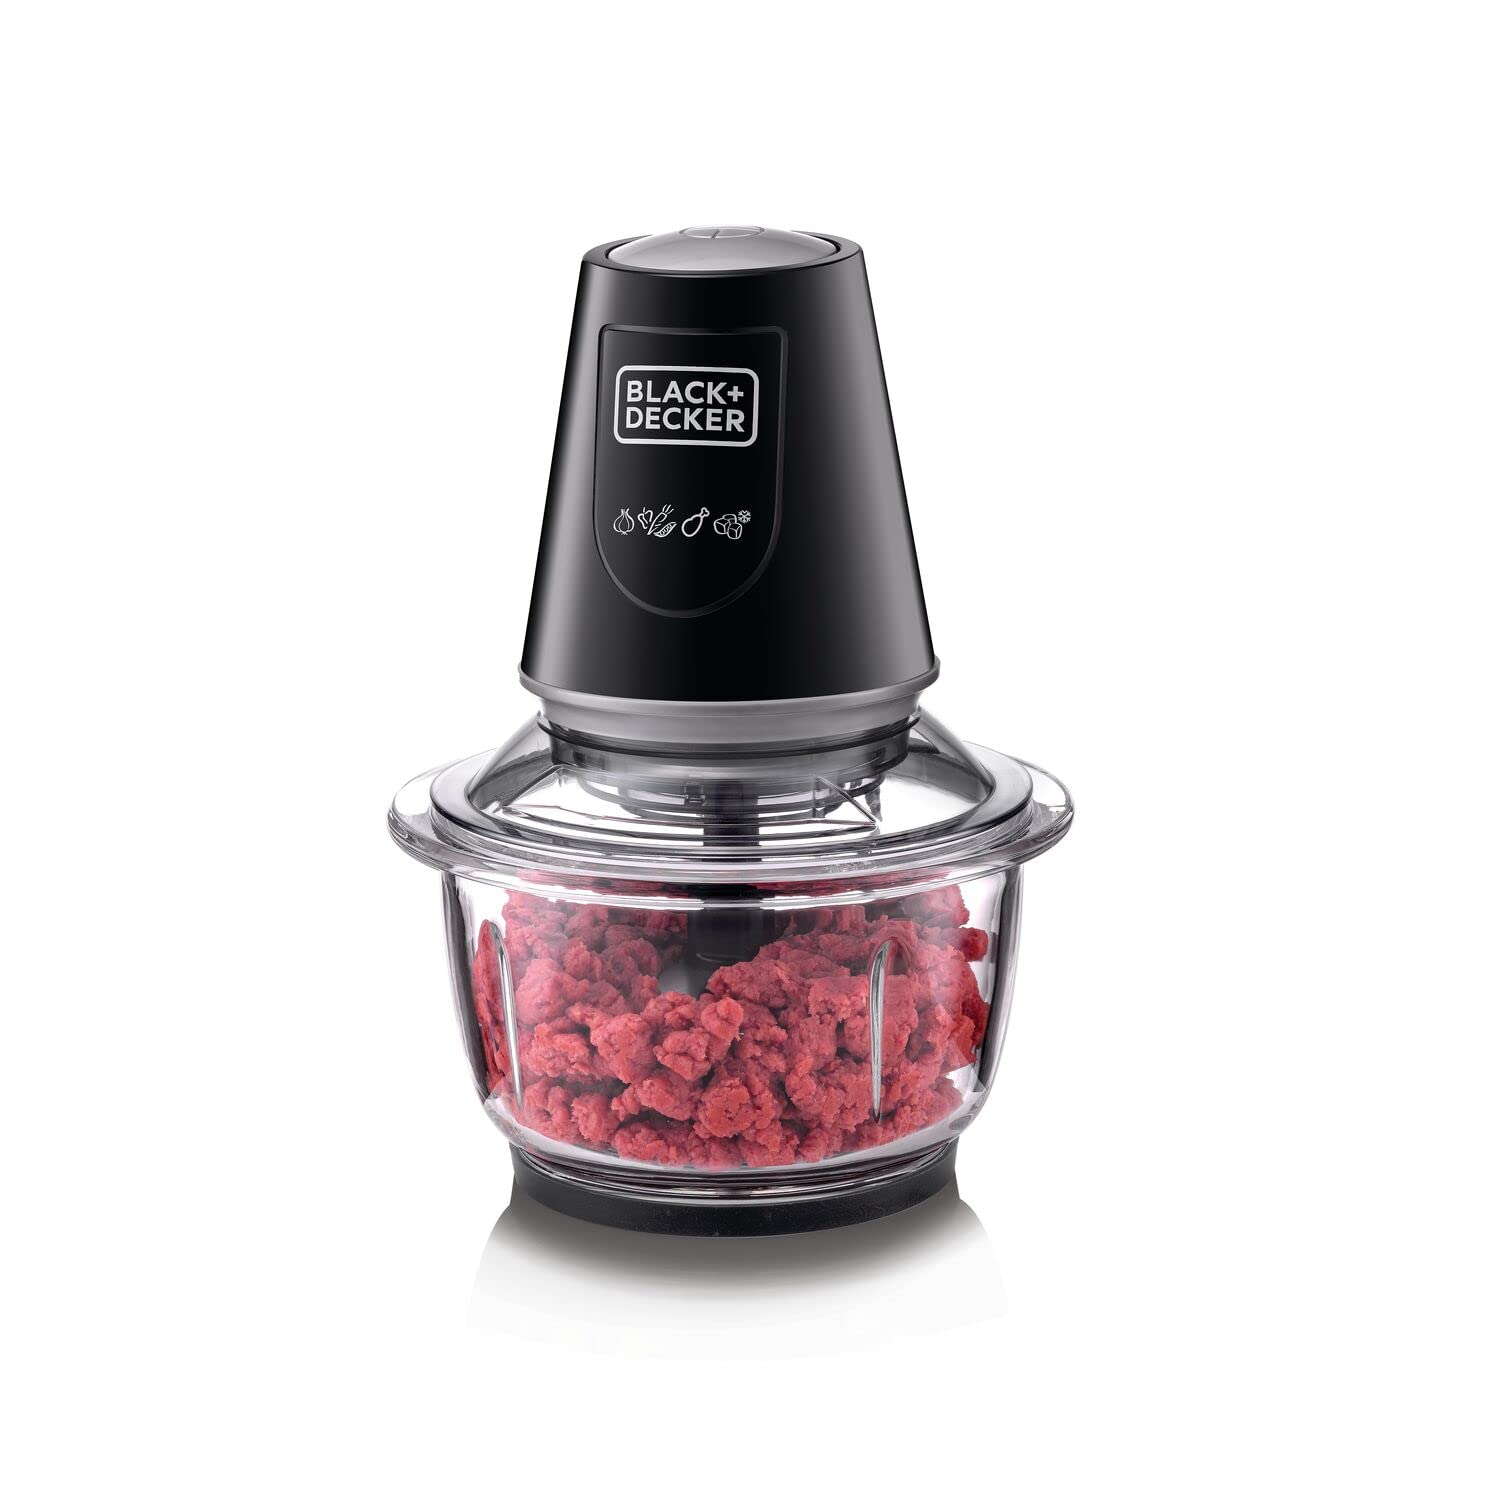 BLACK+DECKER 400W 1.2L Vertical Glass Chopper/Mincer XXL Glass Bowl Capacity With Removable Four Blade System Helps, Chop/Crush Ice/Mince/Grind/Puree Variety Of Ingredients GC400-B5